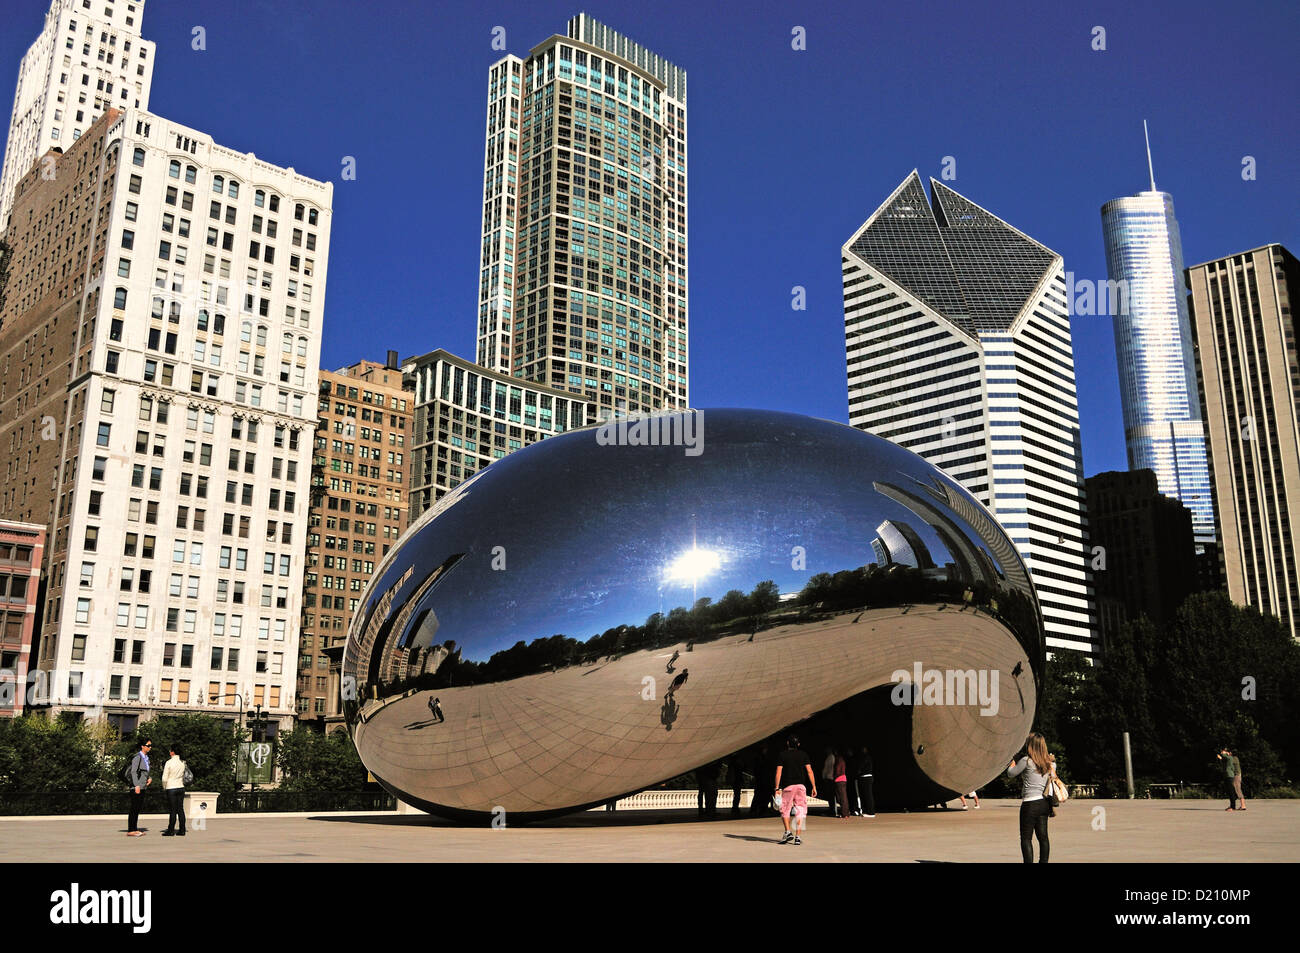 USA Illinois Chicago's Cloud Gate sculpture Millennium Park with Trump Tower, 55 E. Randolph and Smurfit-Stone buildings Stock Photo